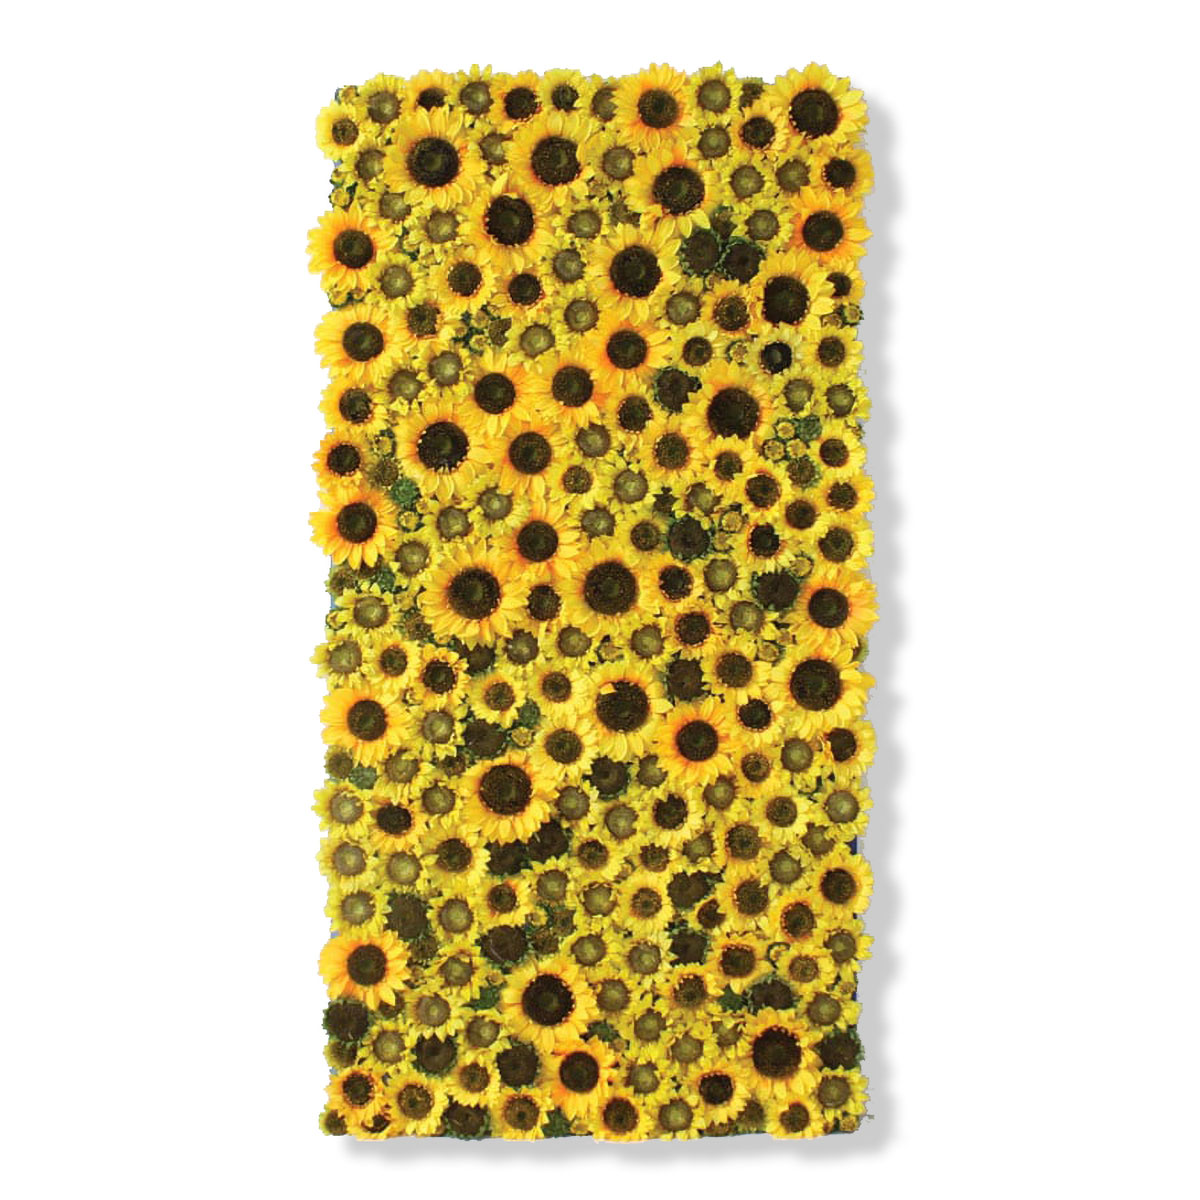 Flower Flat, with sunflowers